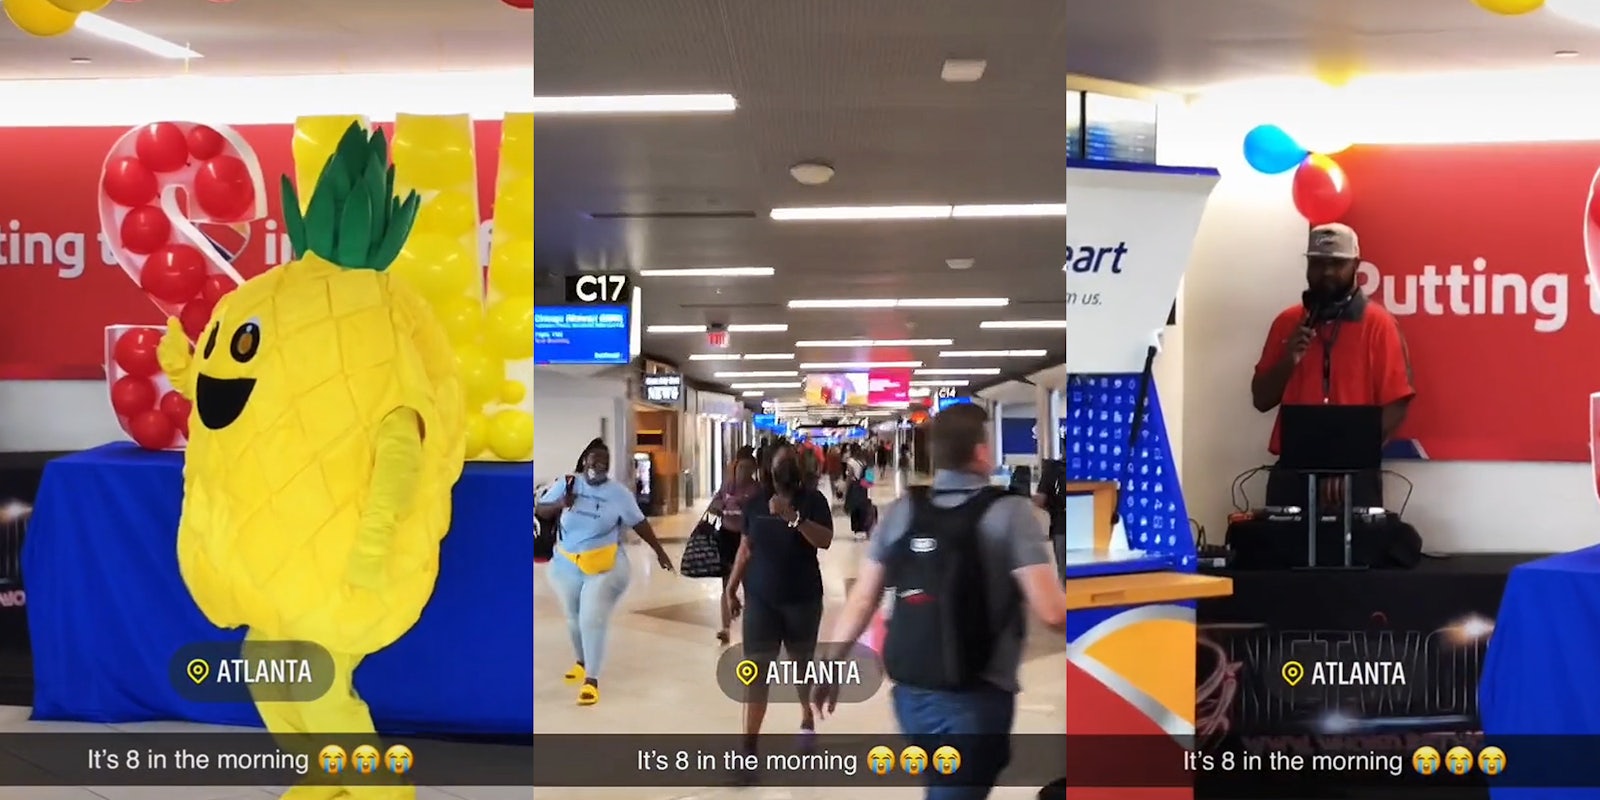 hired person dancing in pineapple costume caption 'ATLANTA It's 8 in the morning' (l) people walking in airport caption 'ATLANTA It's 8 in the morning' (c) hired DJ preforming at airport caption 'ATLANTA It's 8 in the morning' (r)